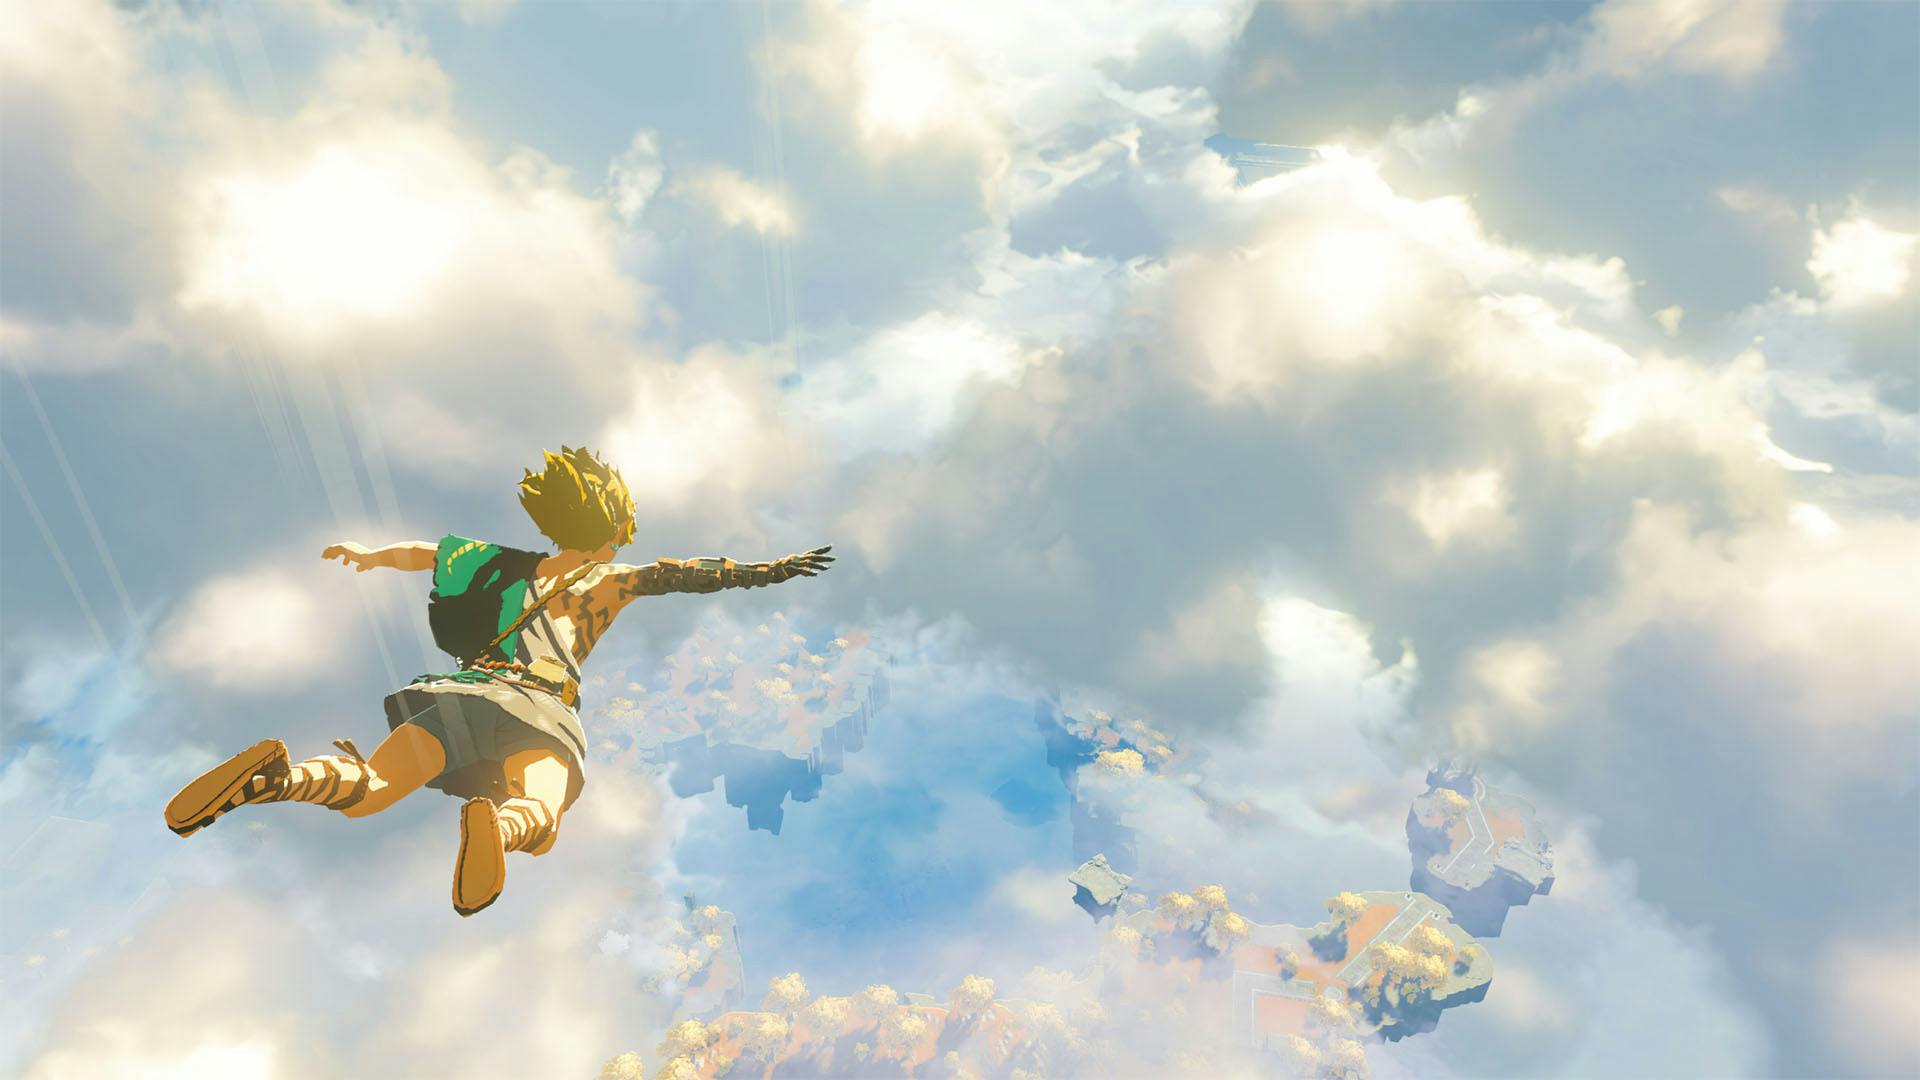 Link dropping in fron the sky.